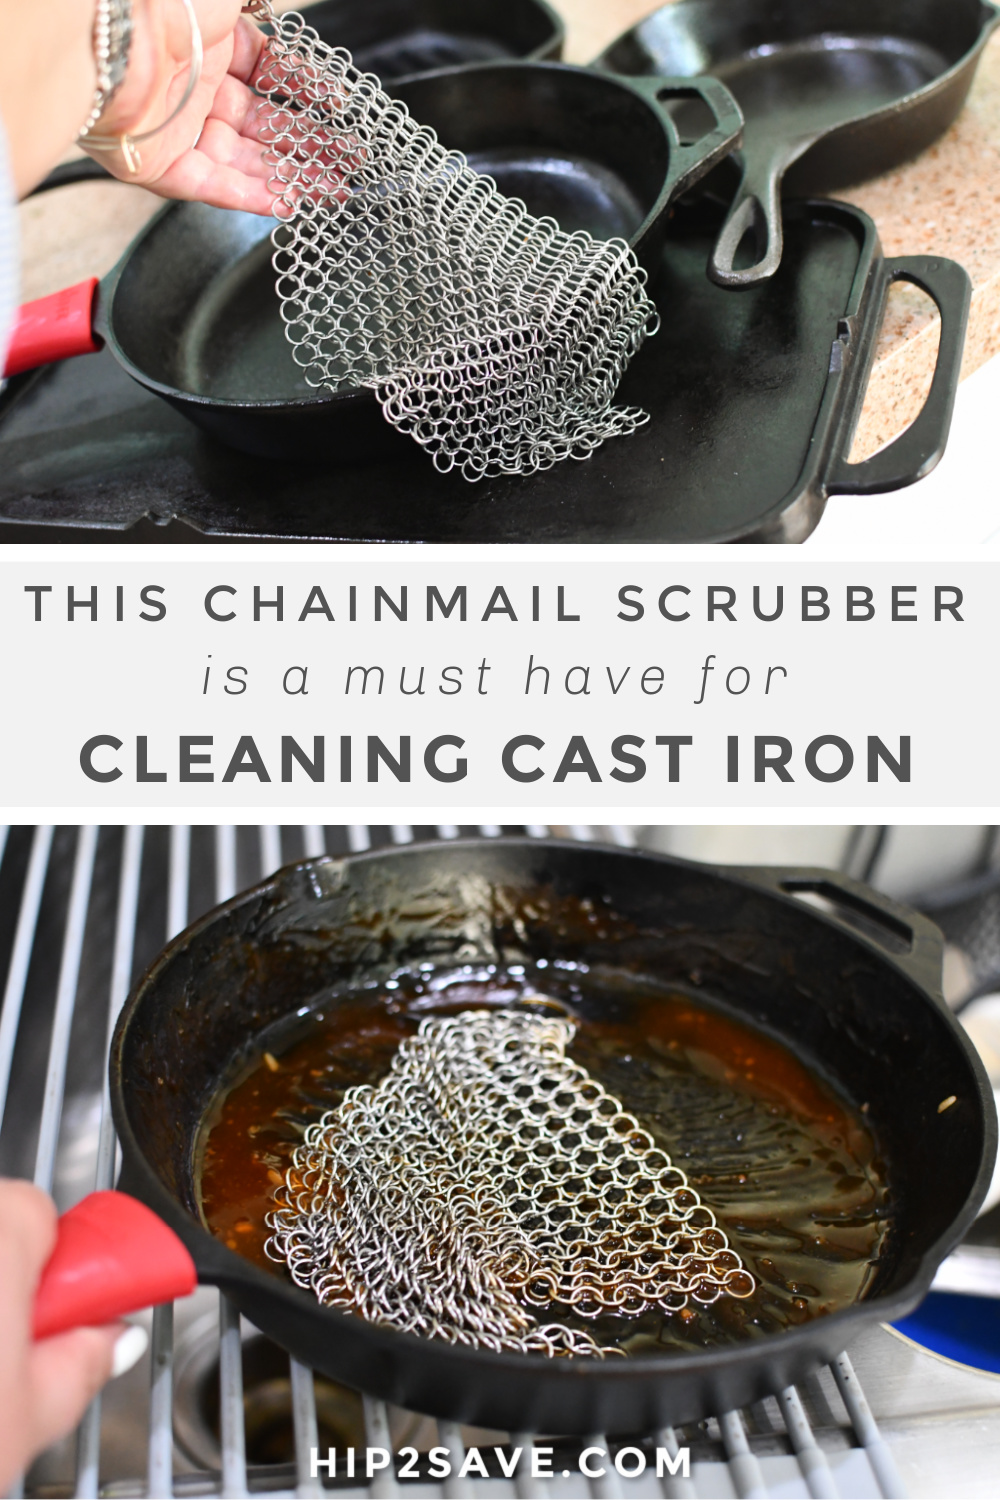 https://hip2save.com/wp-content/uploads/2020/07/cleaning-cast-iron-pinterest.jpg?fit=1000%2C1500&strip=all